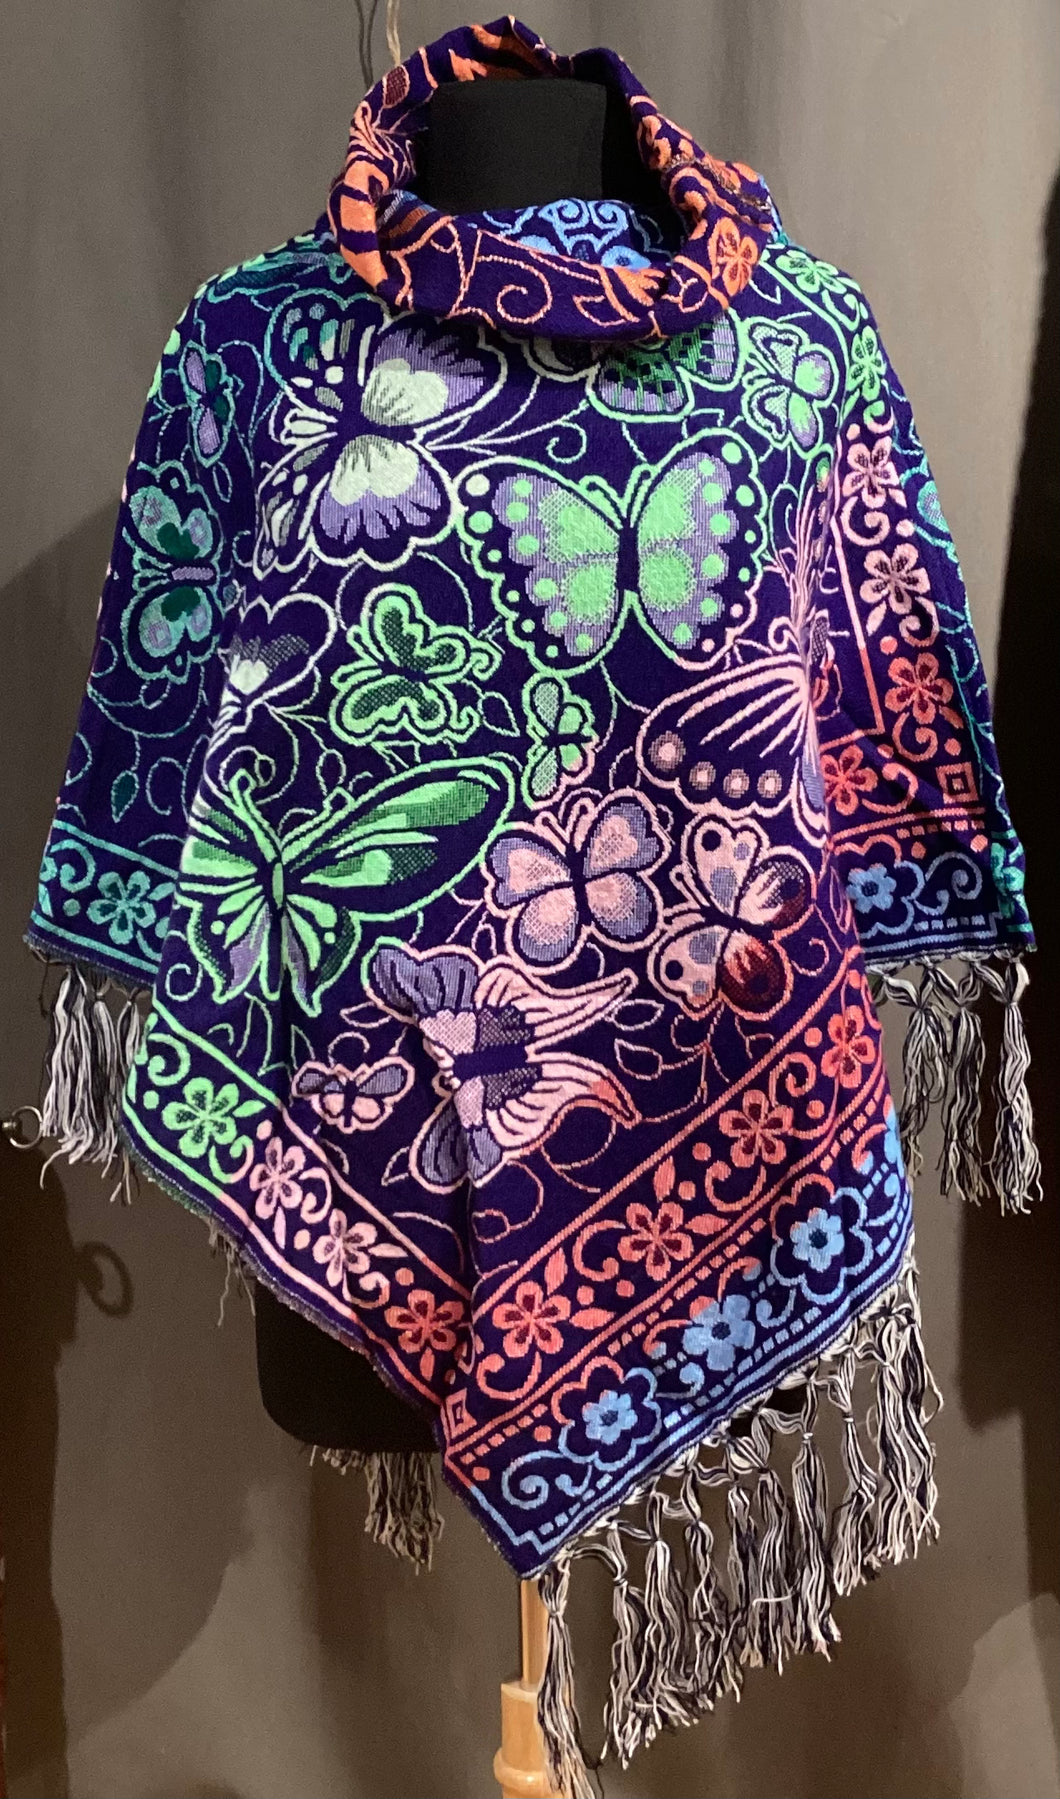 DM1-212 Turtle Neck Poncho Butterfly